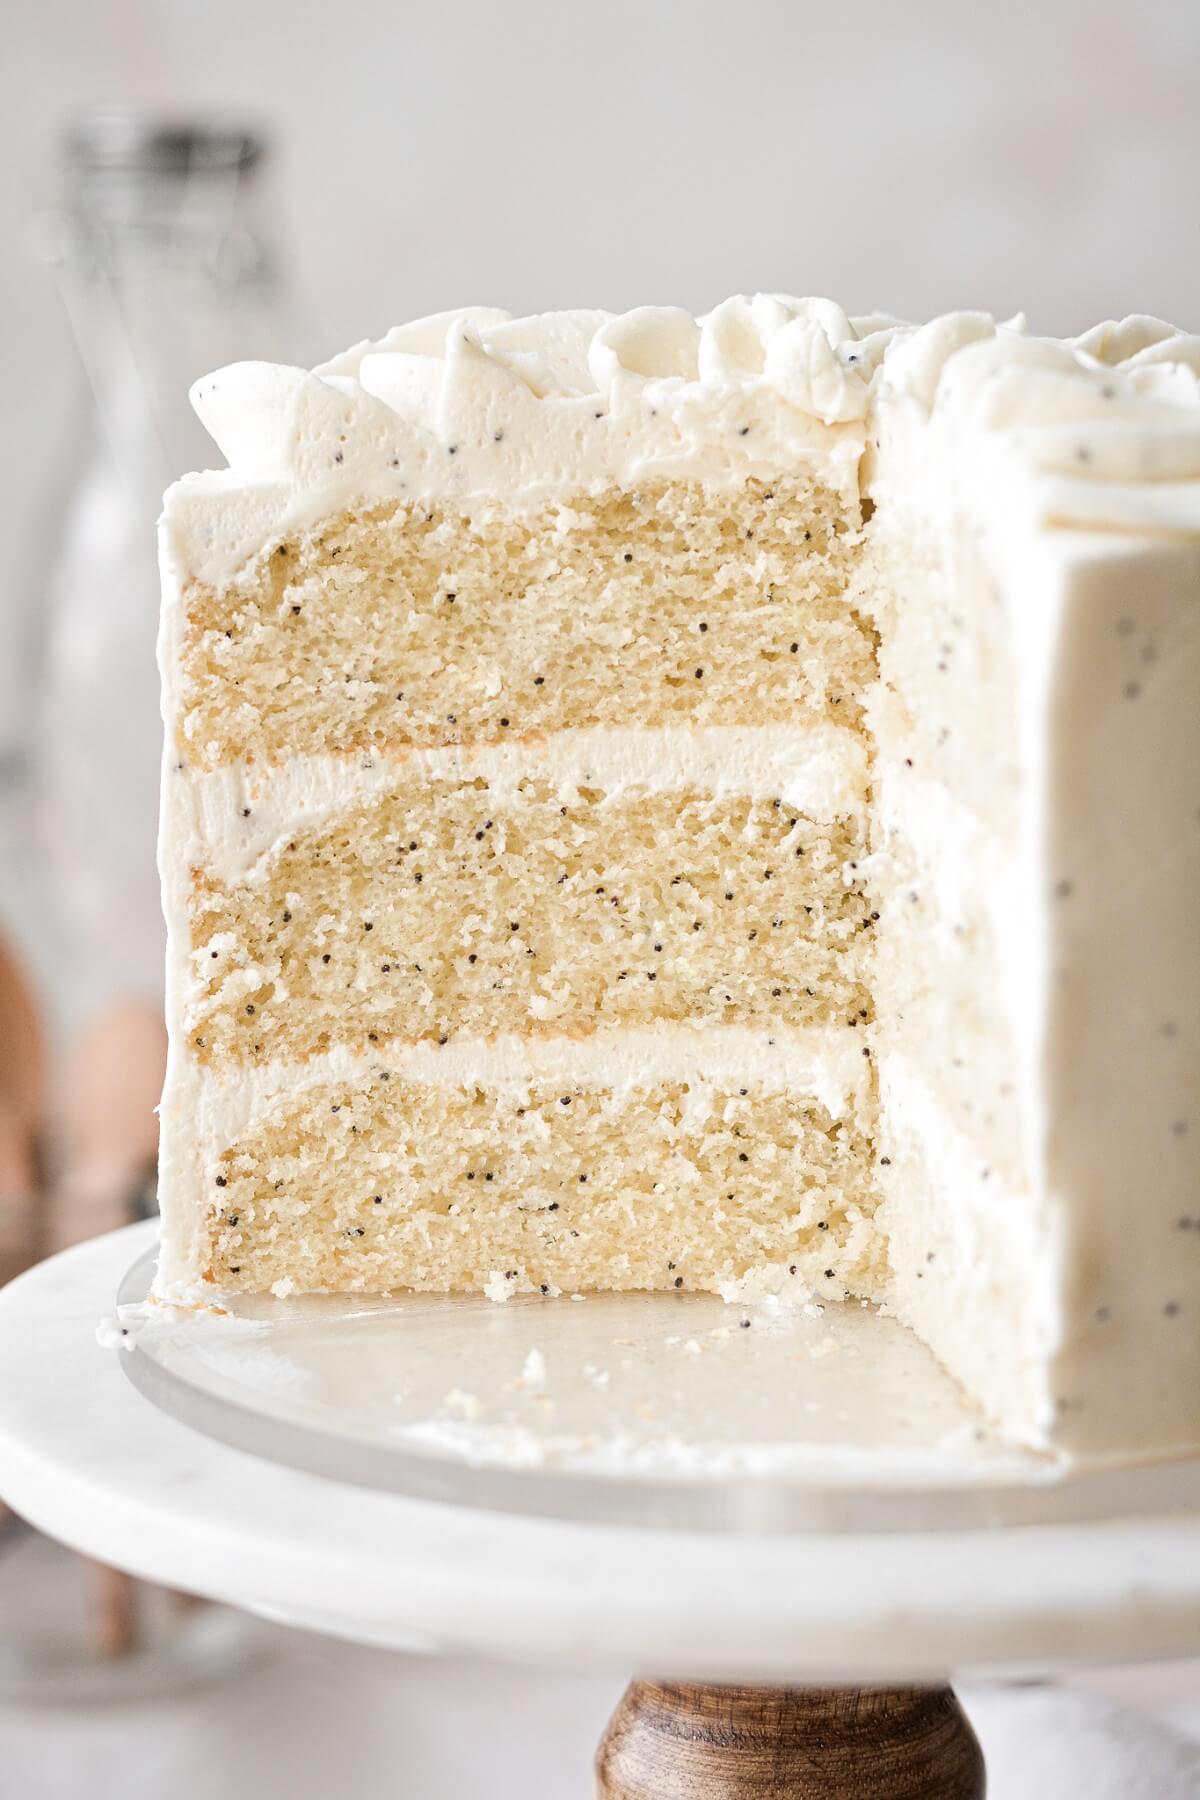 Inside layers of an almond poppy seed cake.